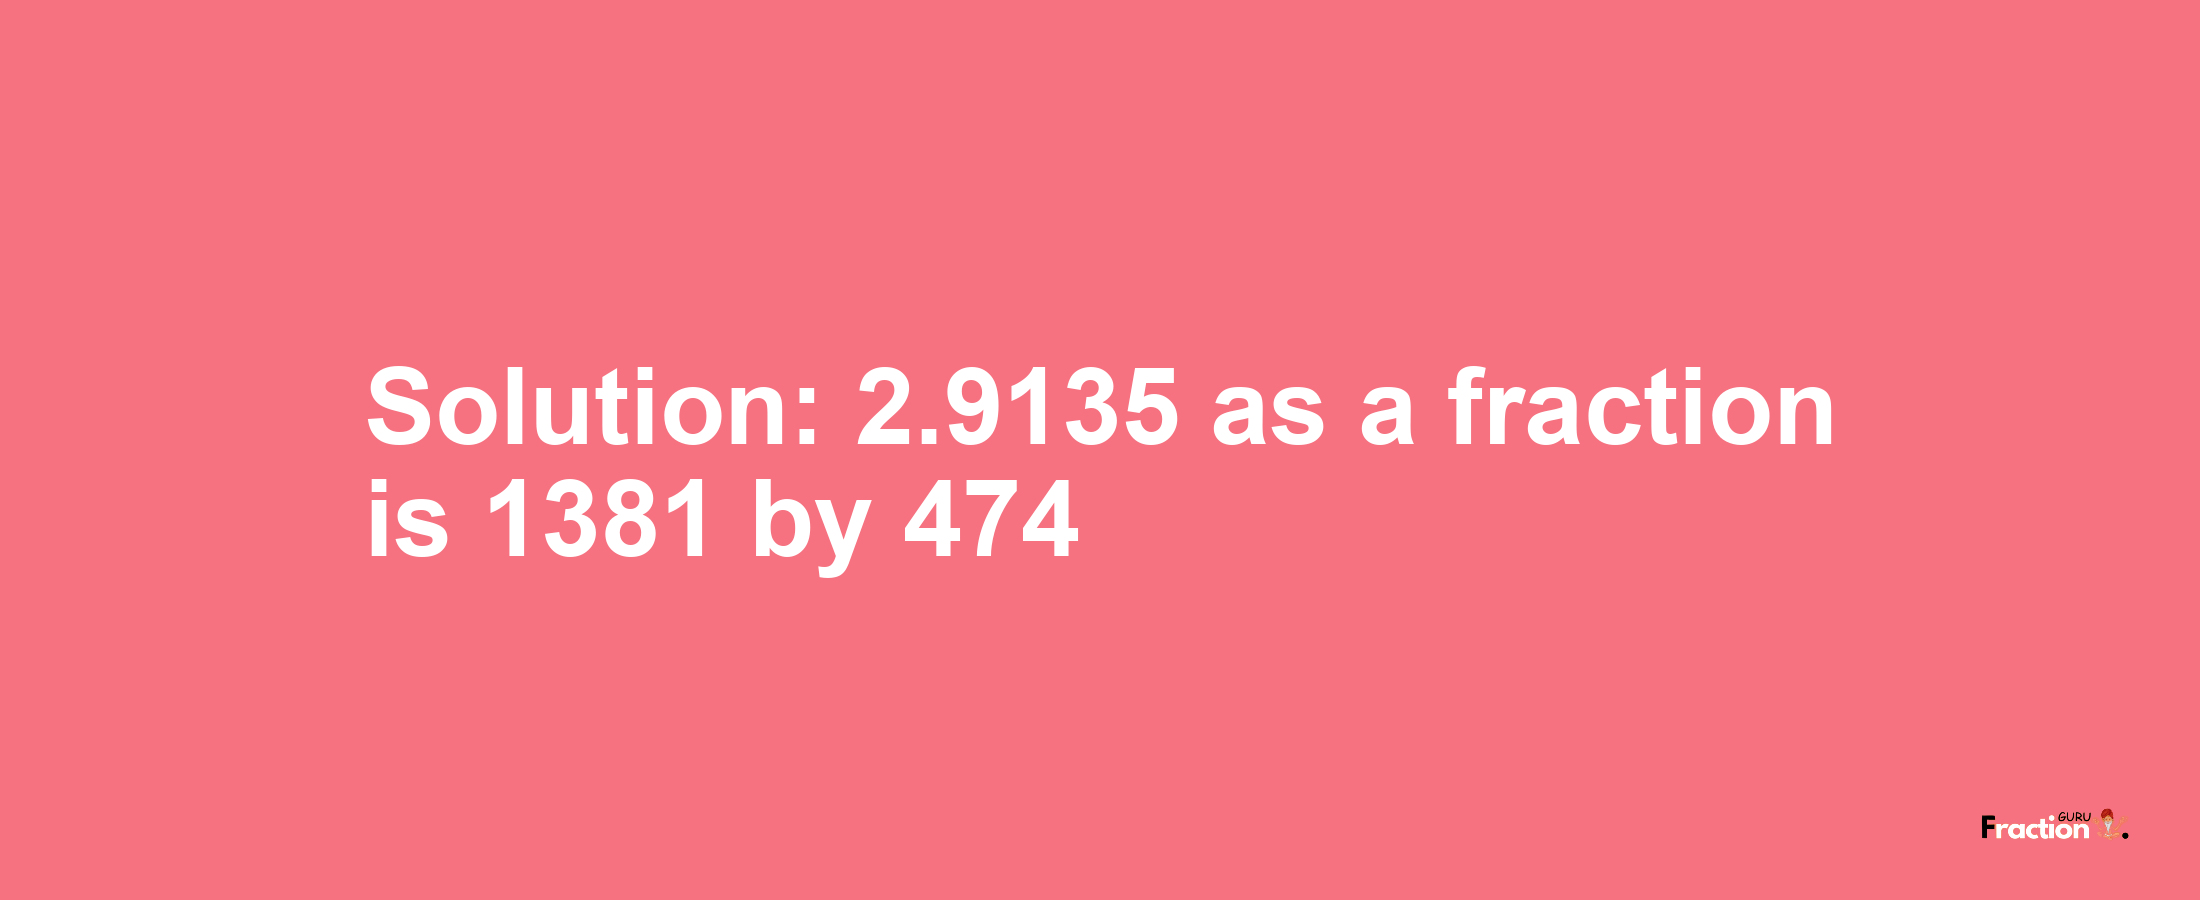 Solution:2.9135 as a fraction is 1381/474